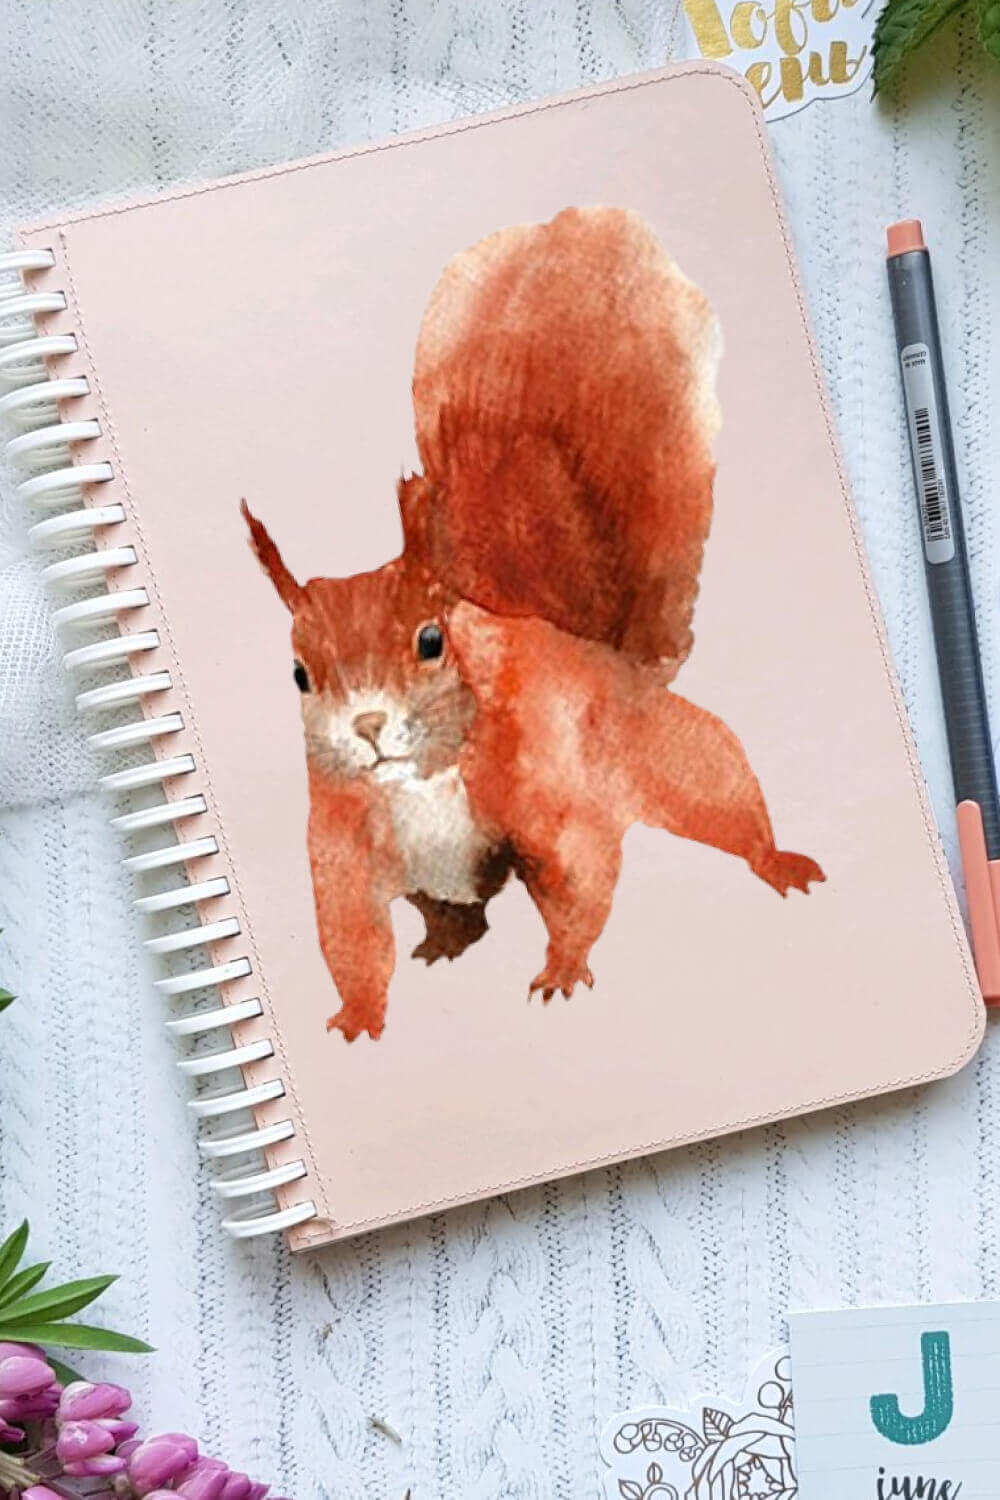 Red squirrel painted in watercolor on the cover of a notebook.